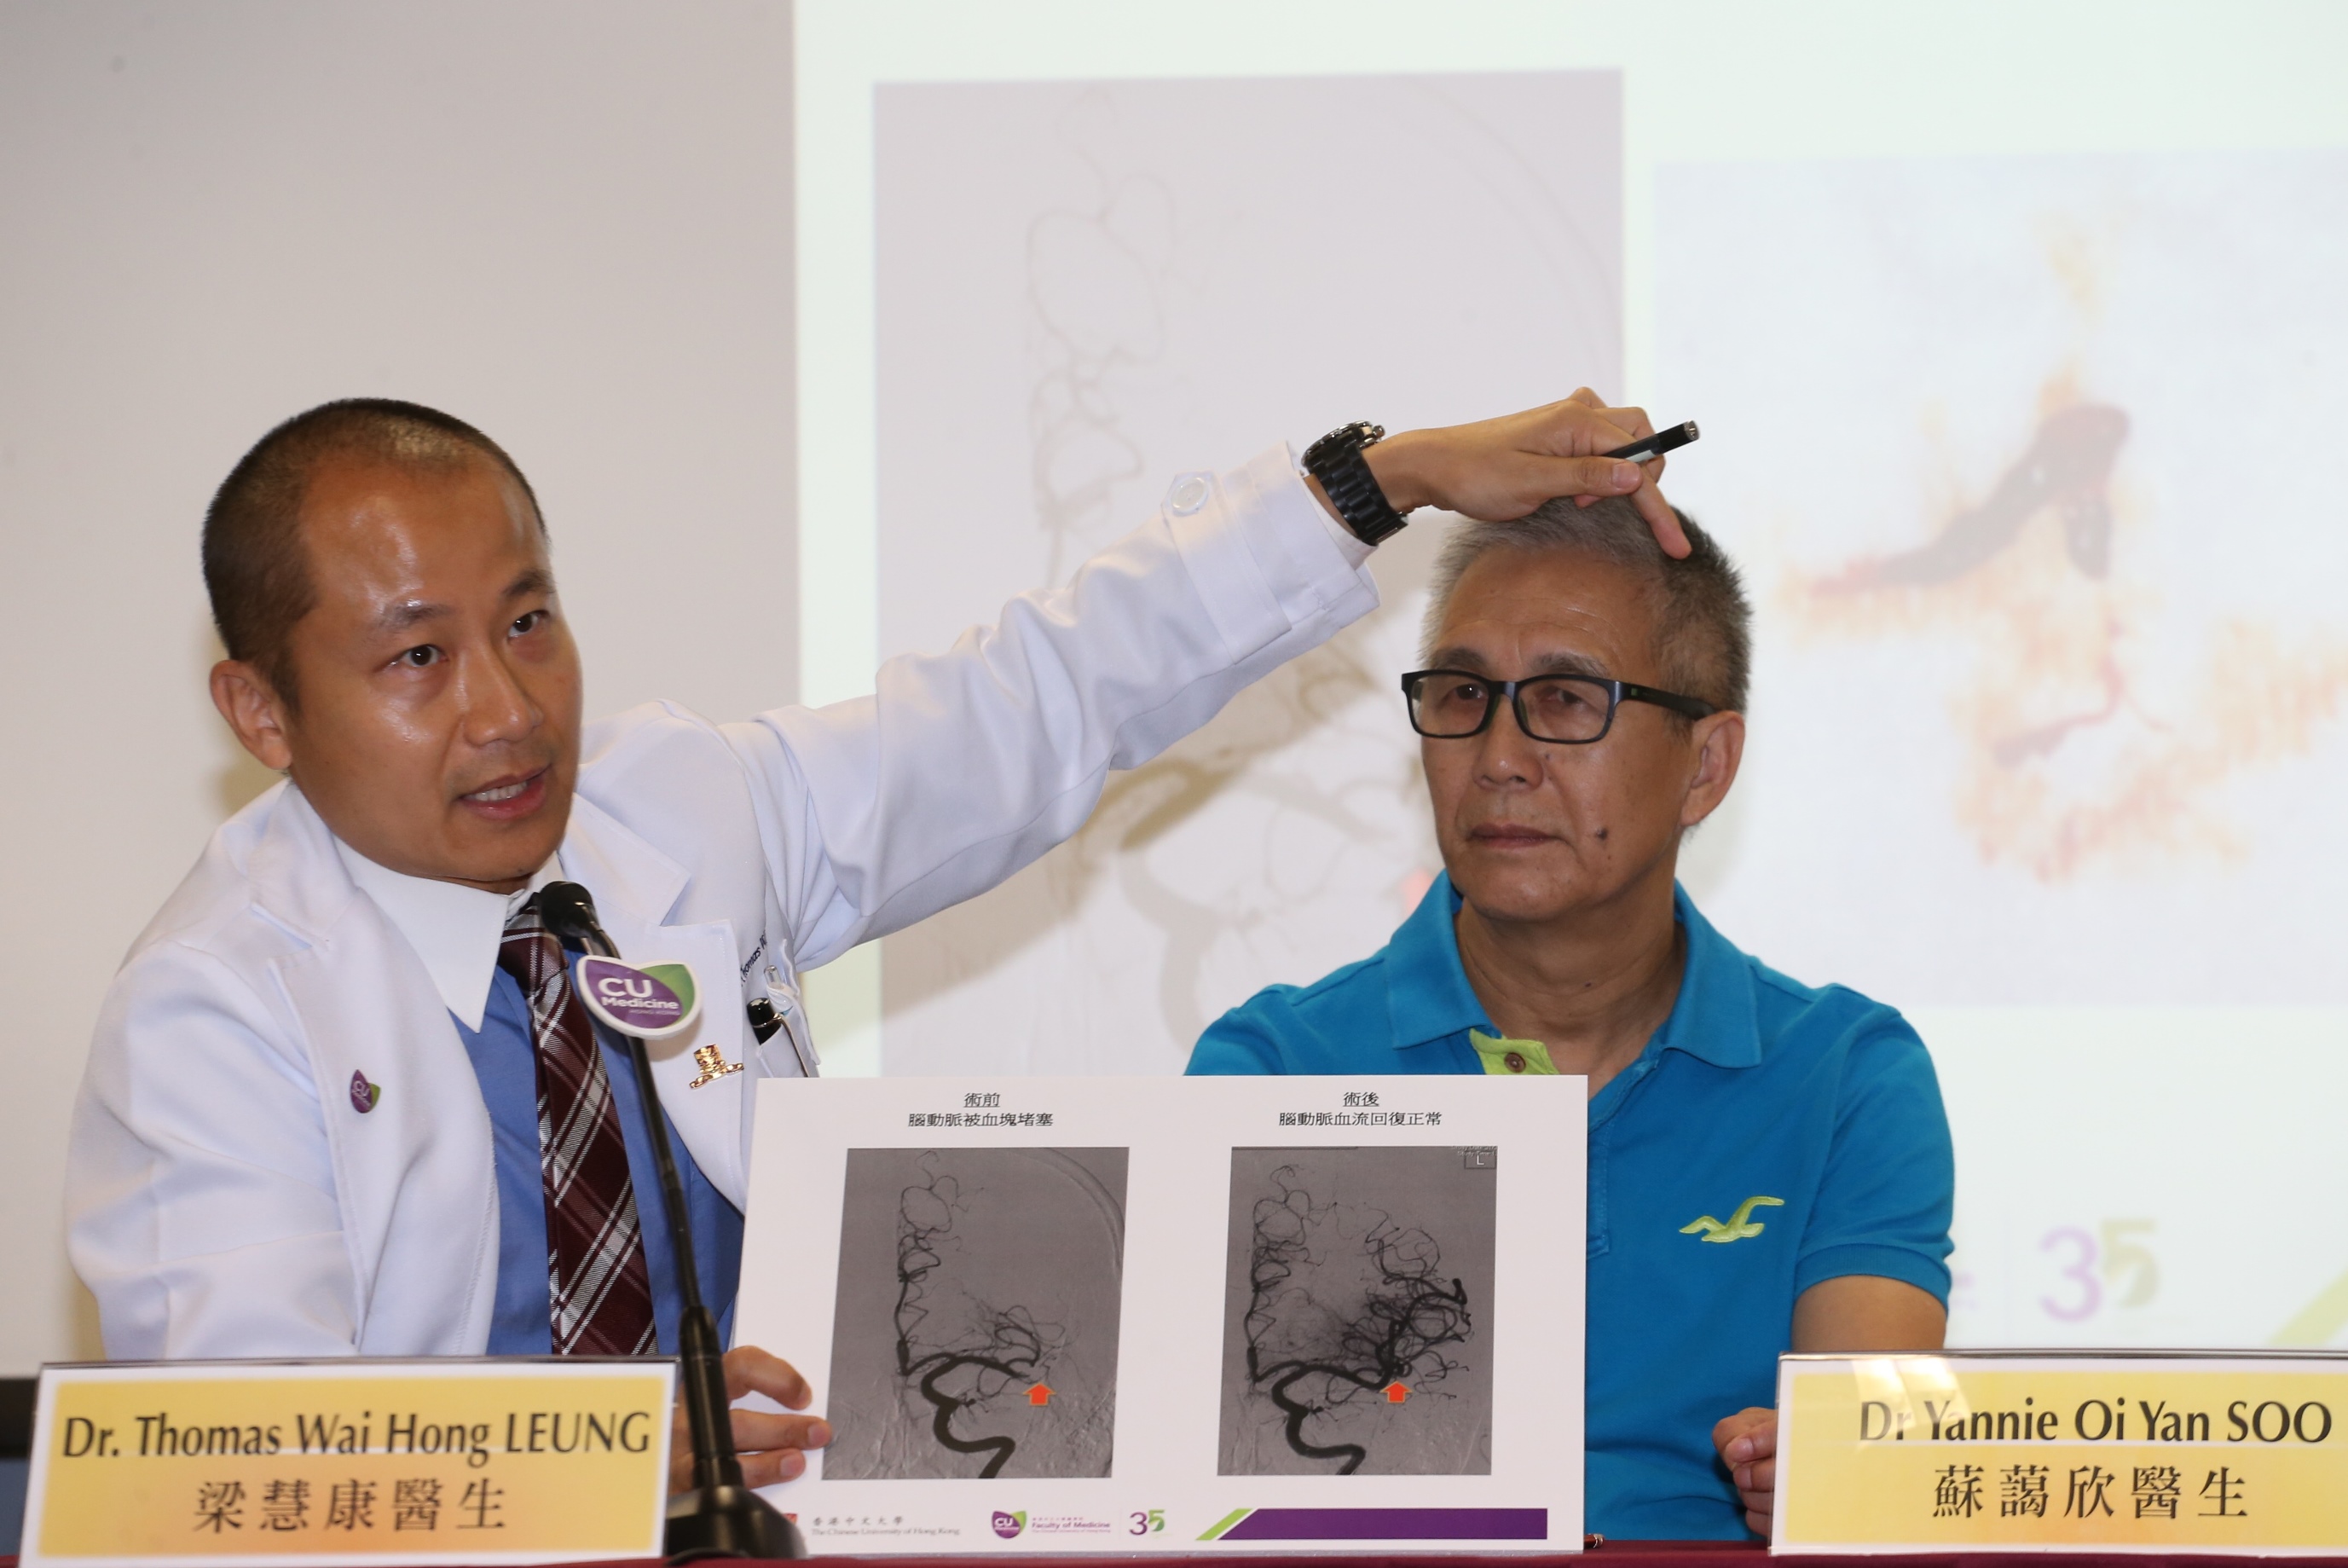 Dr Thomas LEUNG (left) explains that Mr LOK’s left cerebral artery was occluded by a blood clot several months ago when he had a stroke. His blood flow to left cerebral artery is back to normal after the blood clot was retrieved. 